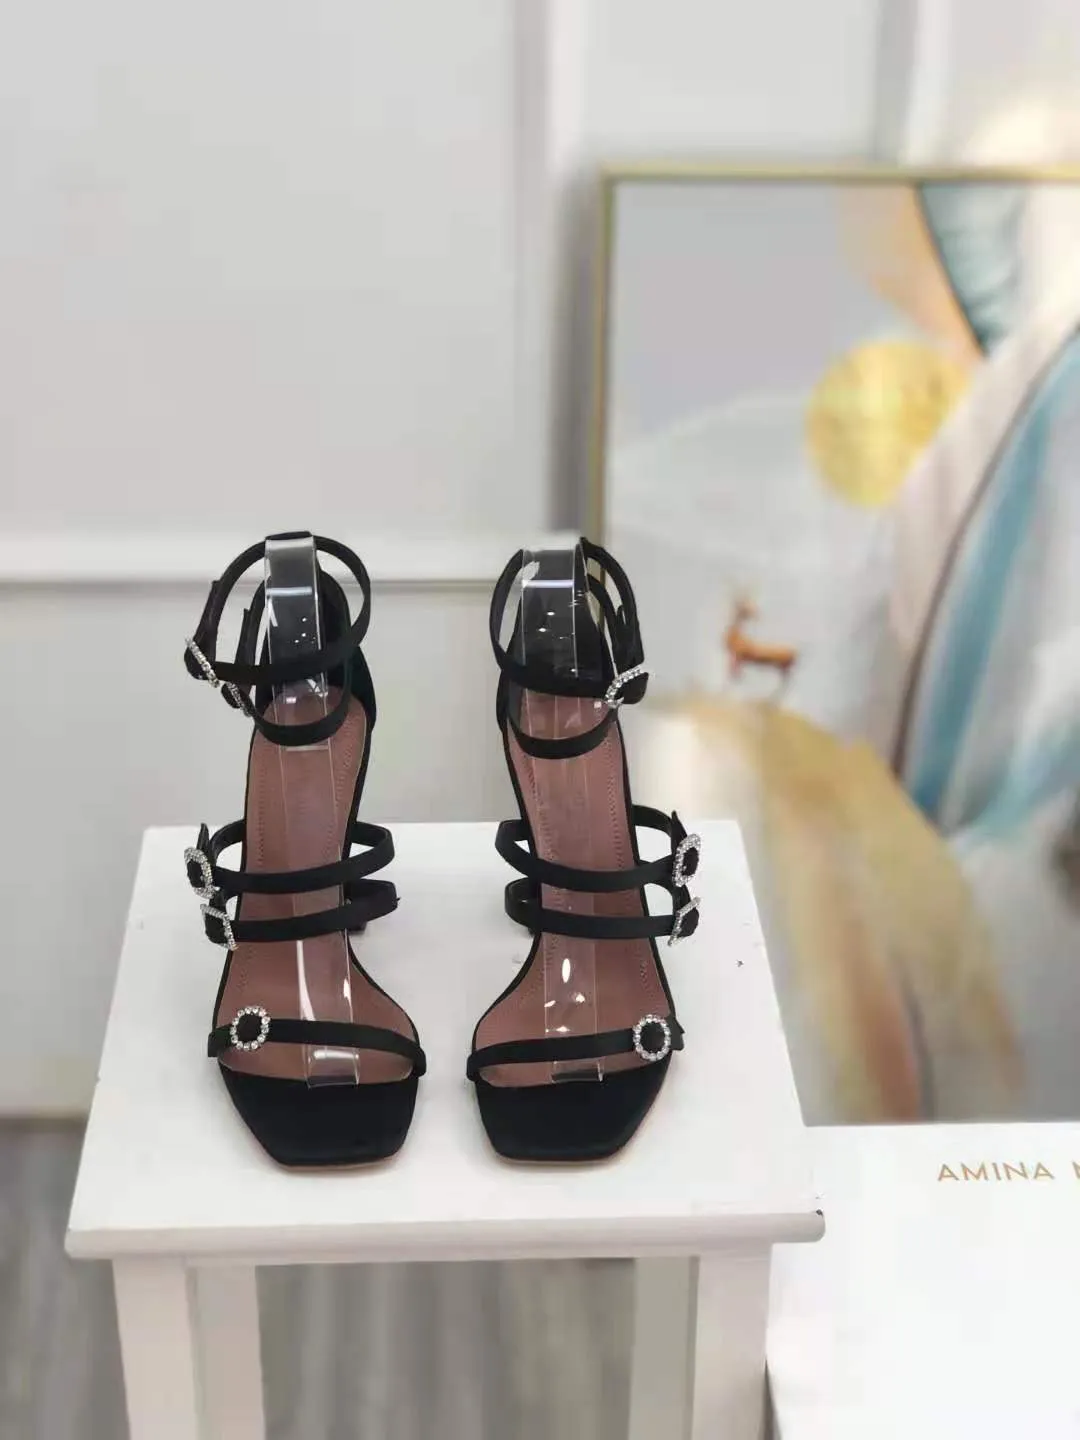 Original Box Amina Muaddi Robyn Sandals Crystal-embellished Fluted Heels Italy Crystal Buckles Shoes Black Perfect Quality